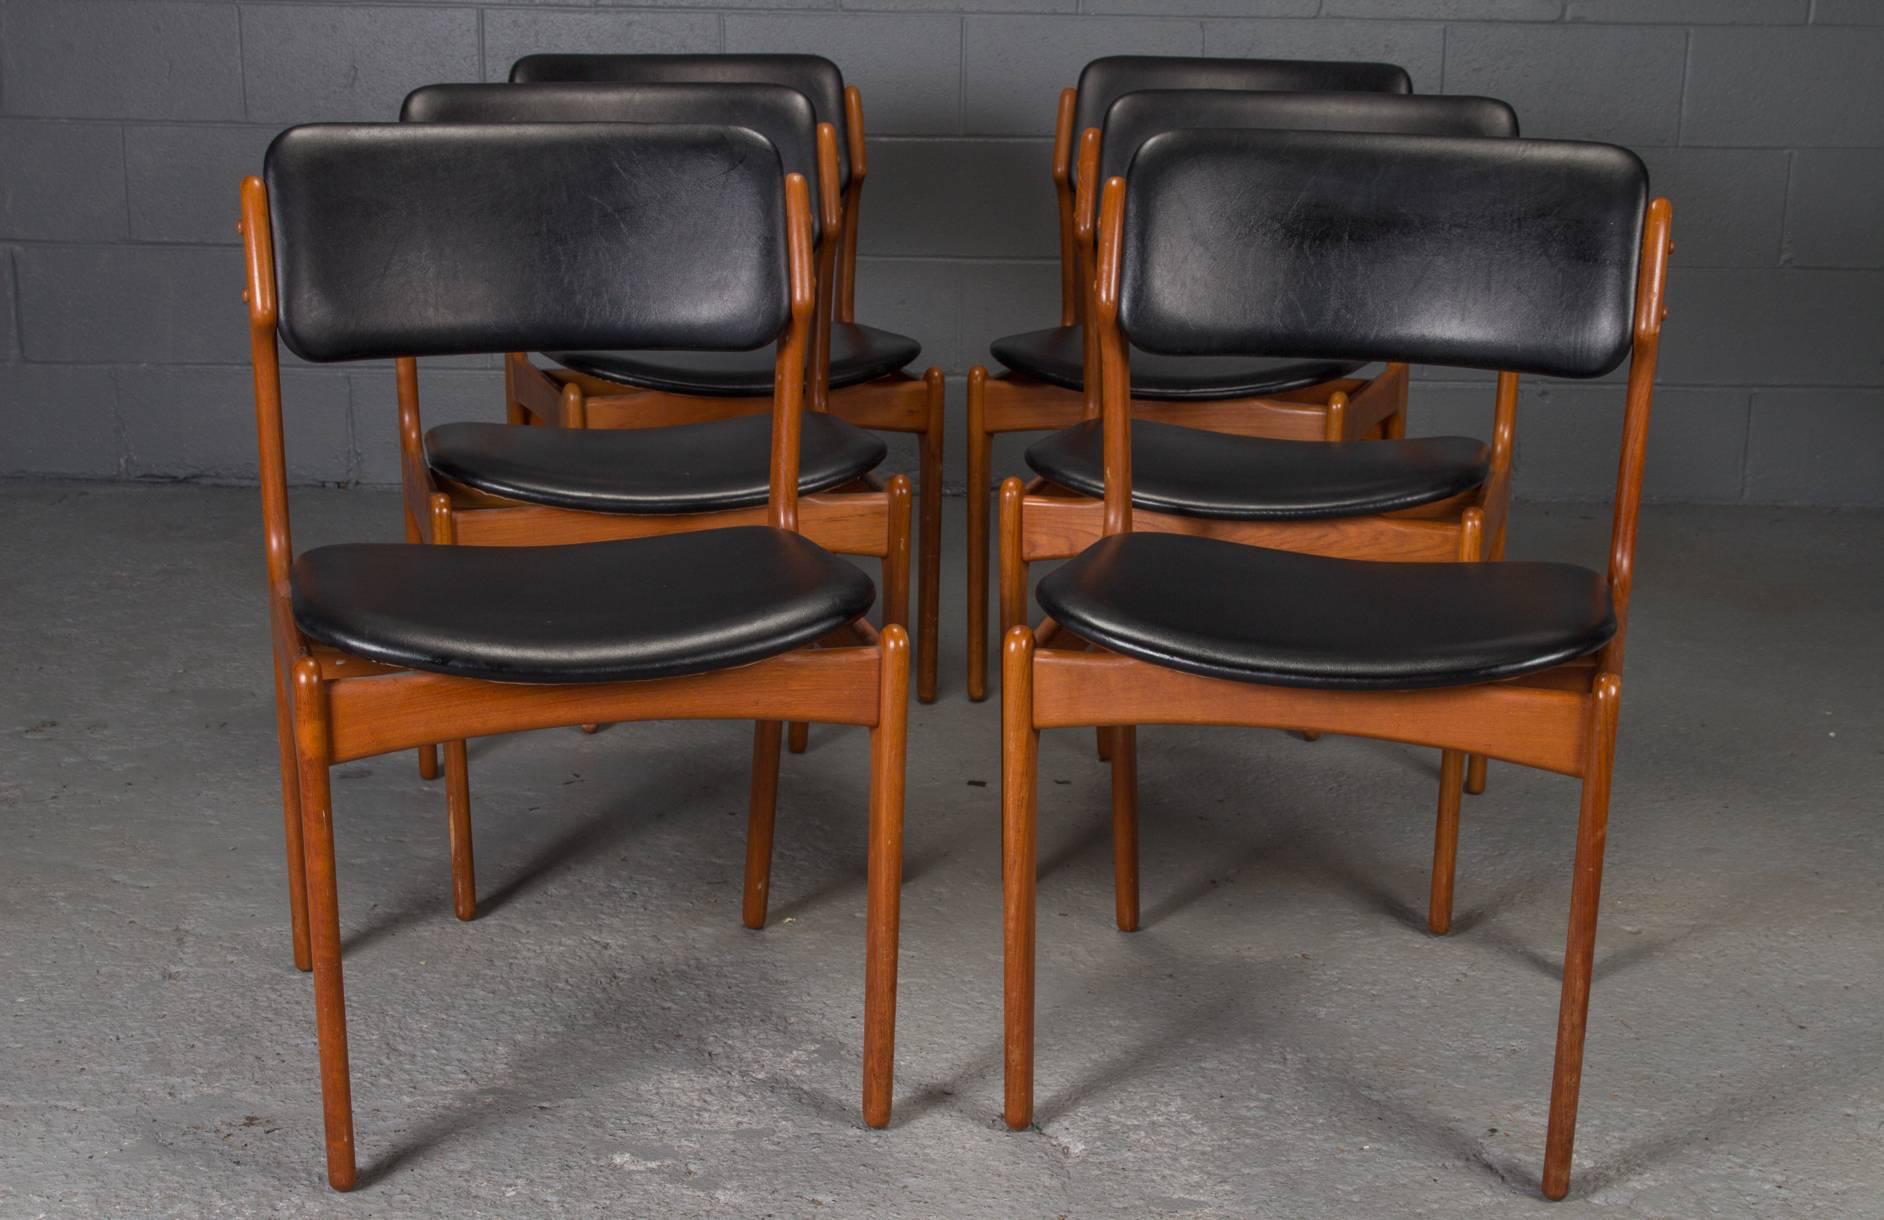 Designed in Denmark by Erik Buch for O.D. Mobler, these chairs feature a teak frame with leather seat and back, and are sold as a set of six.